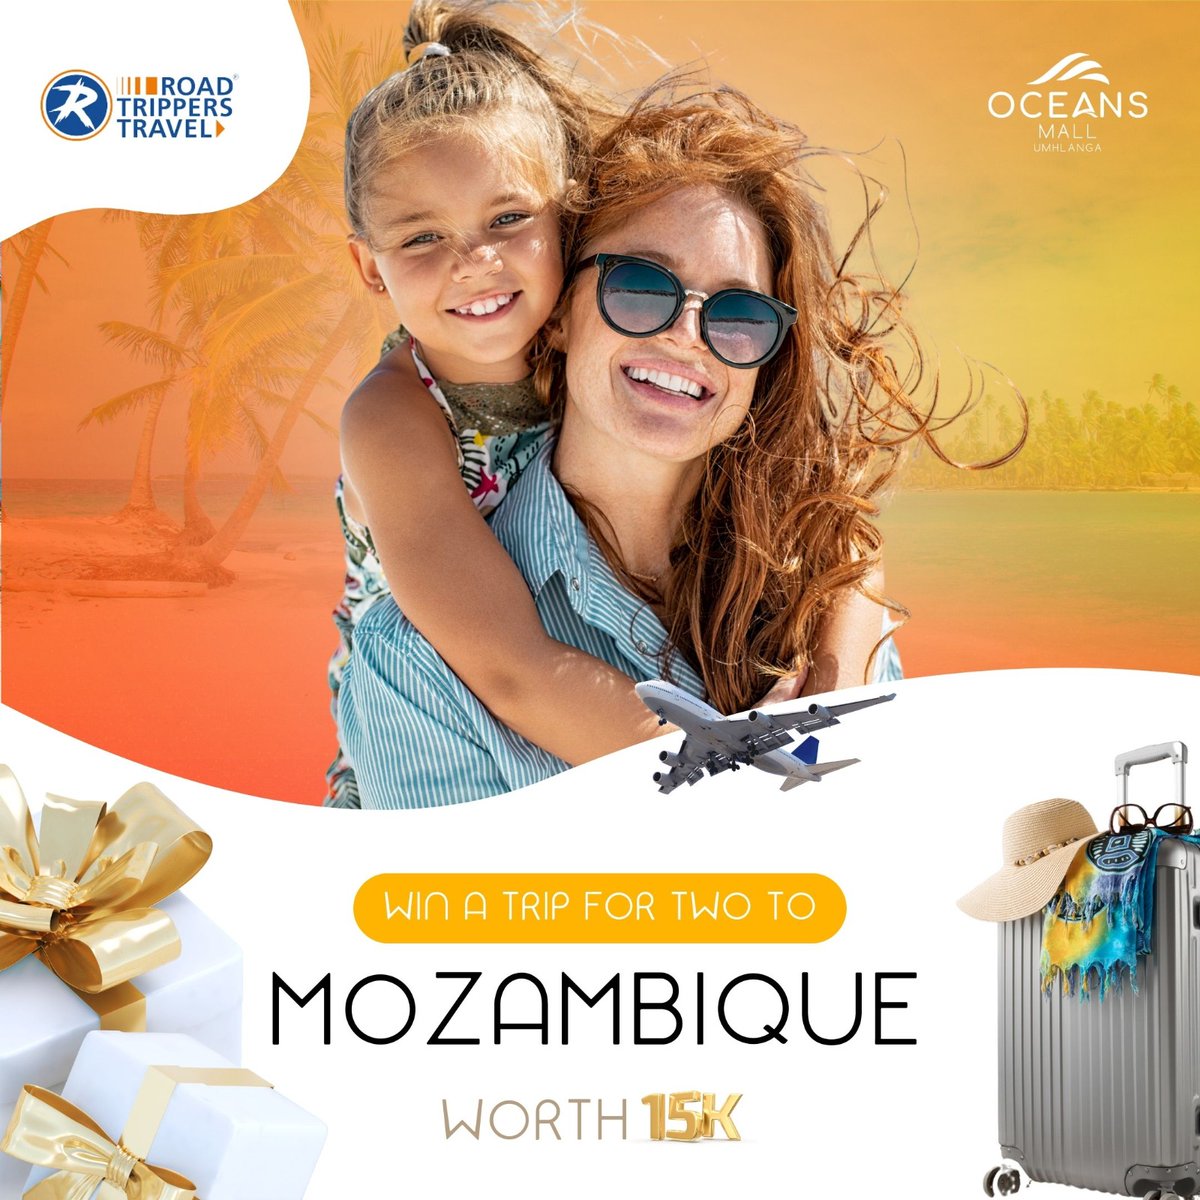 Spoil Mom this #MothersDay! 💖 Win a dream getaway for TWO to Mozambique! 🌴🌊 Spend R350+ at Oceans Mall throughout the month of May, submit receipts at the information desk, enter to win! 🎁T&Cs apply. 

#MothersDay #Giveaway #EnterToWin #OceansMall